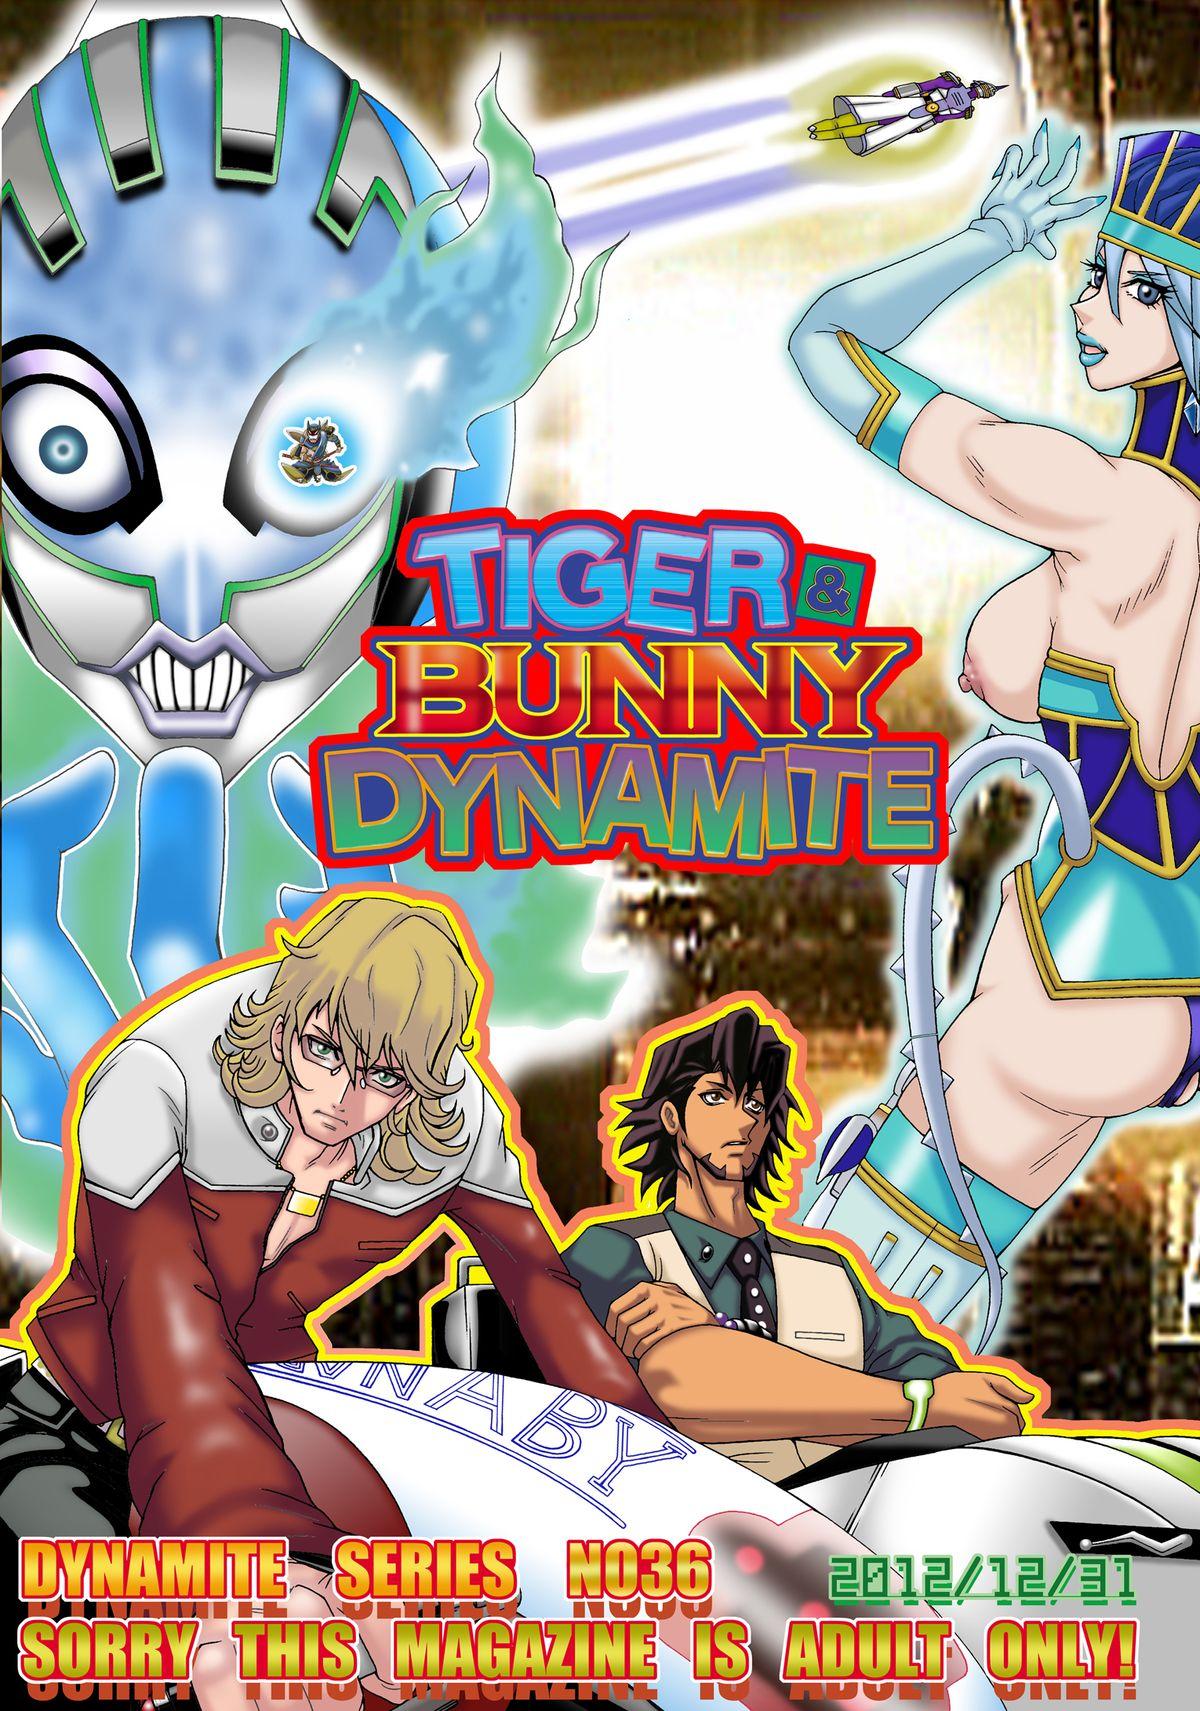 Titties Tiger & Bunny Dynamite - Tiger and bunny Huge Tits - Page 1